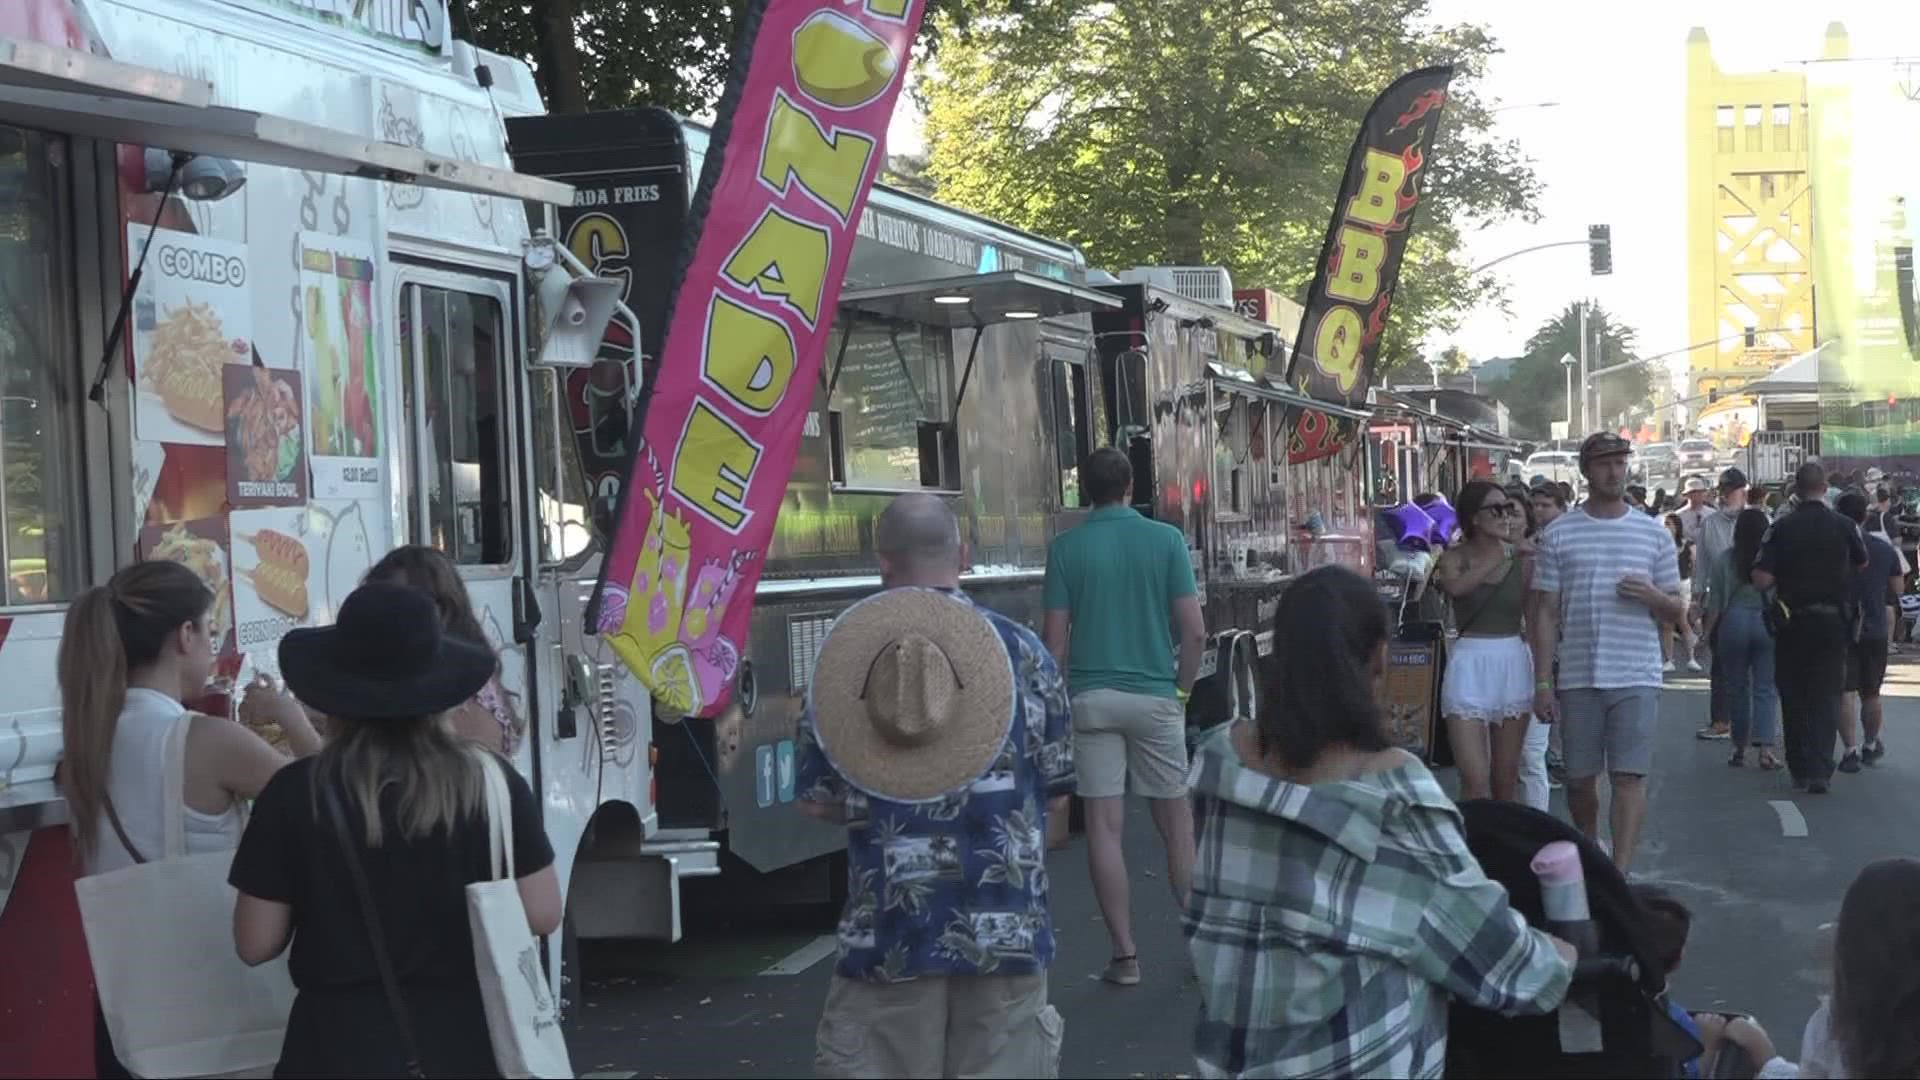 The 9th annual farm-to-fork festival was held Friday and Saturday in Sacramento.